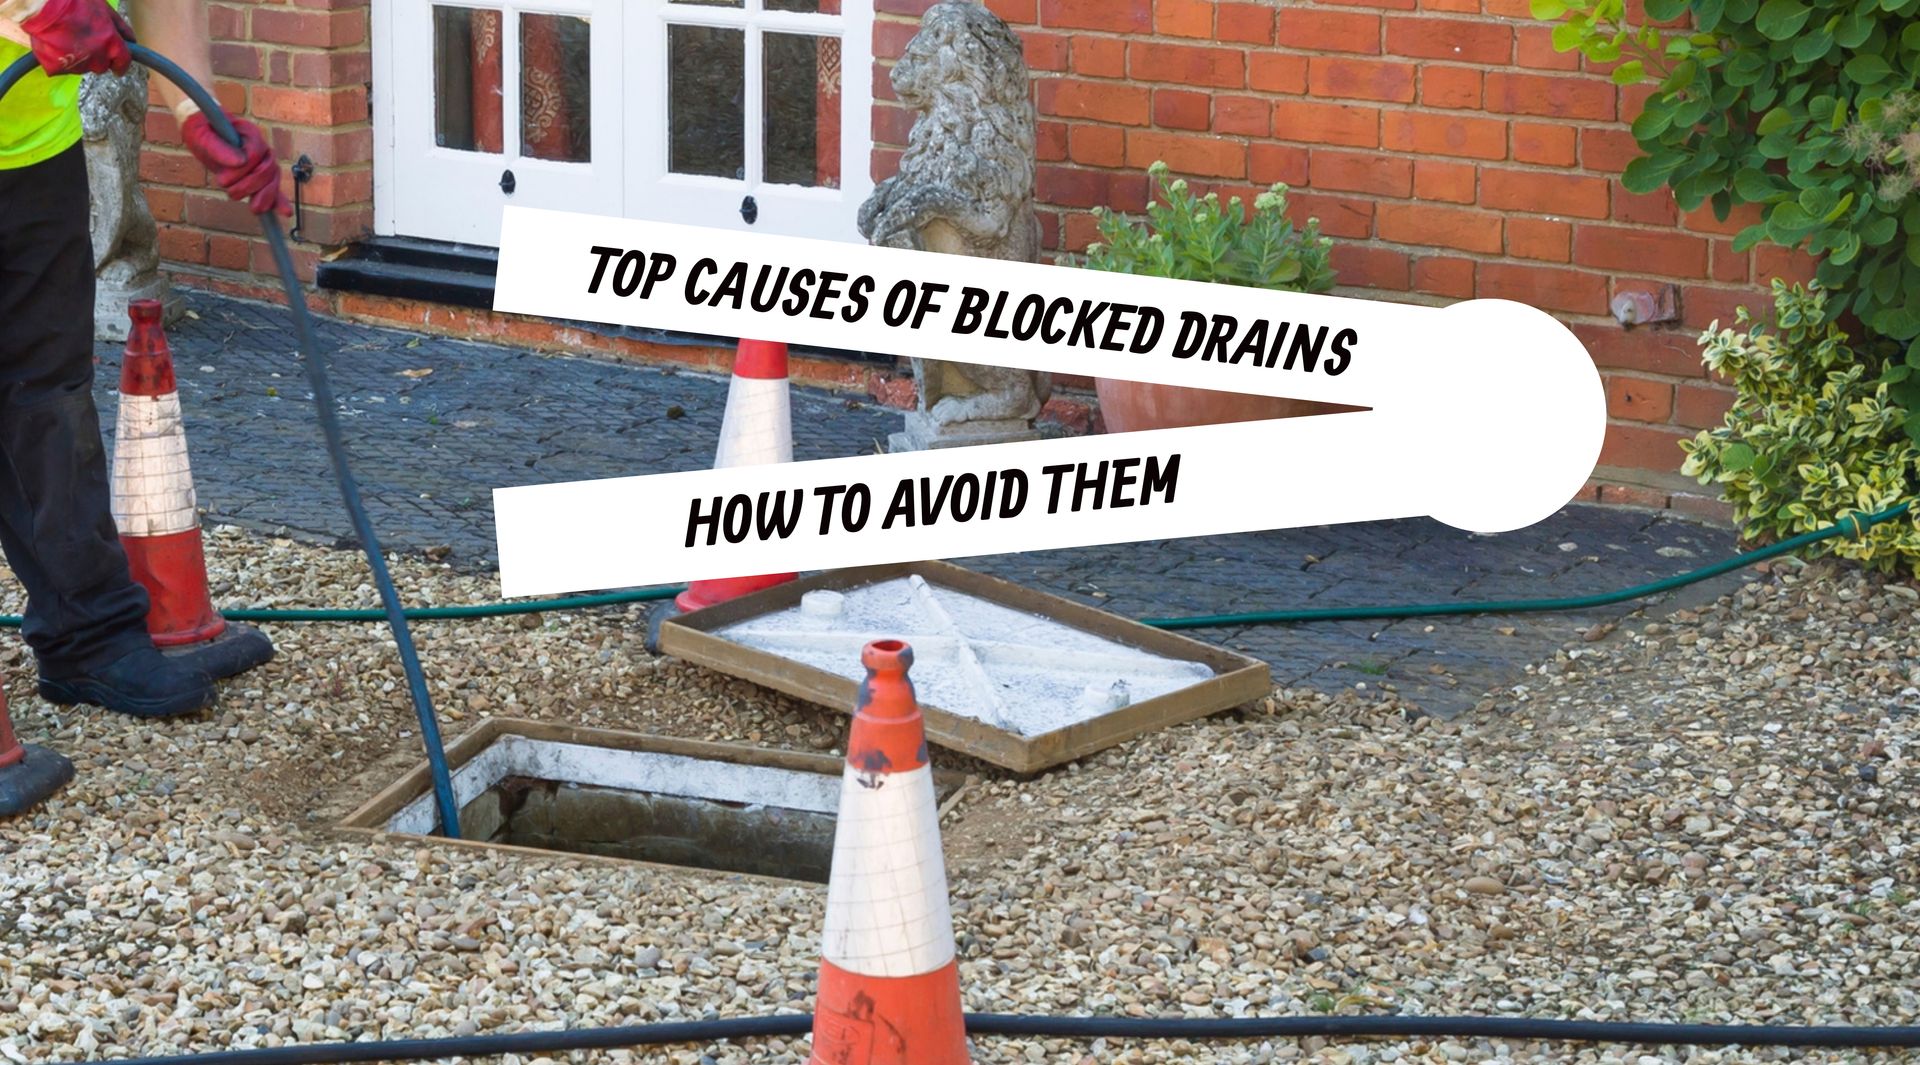 The Top Causes of Blocked Drains and How to Avoid Them